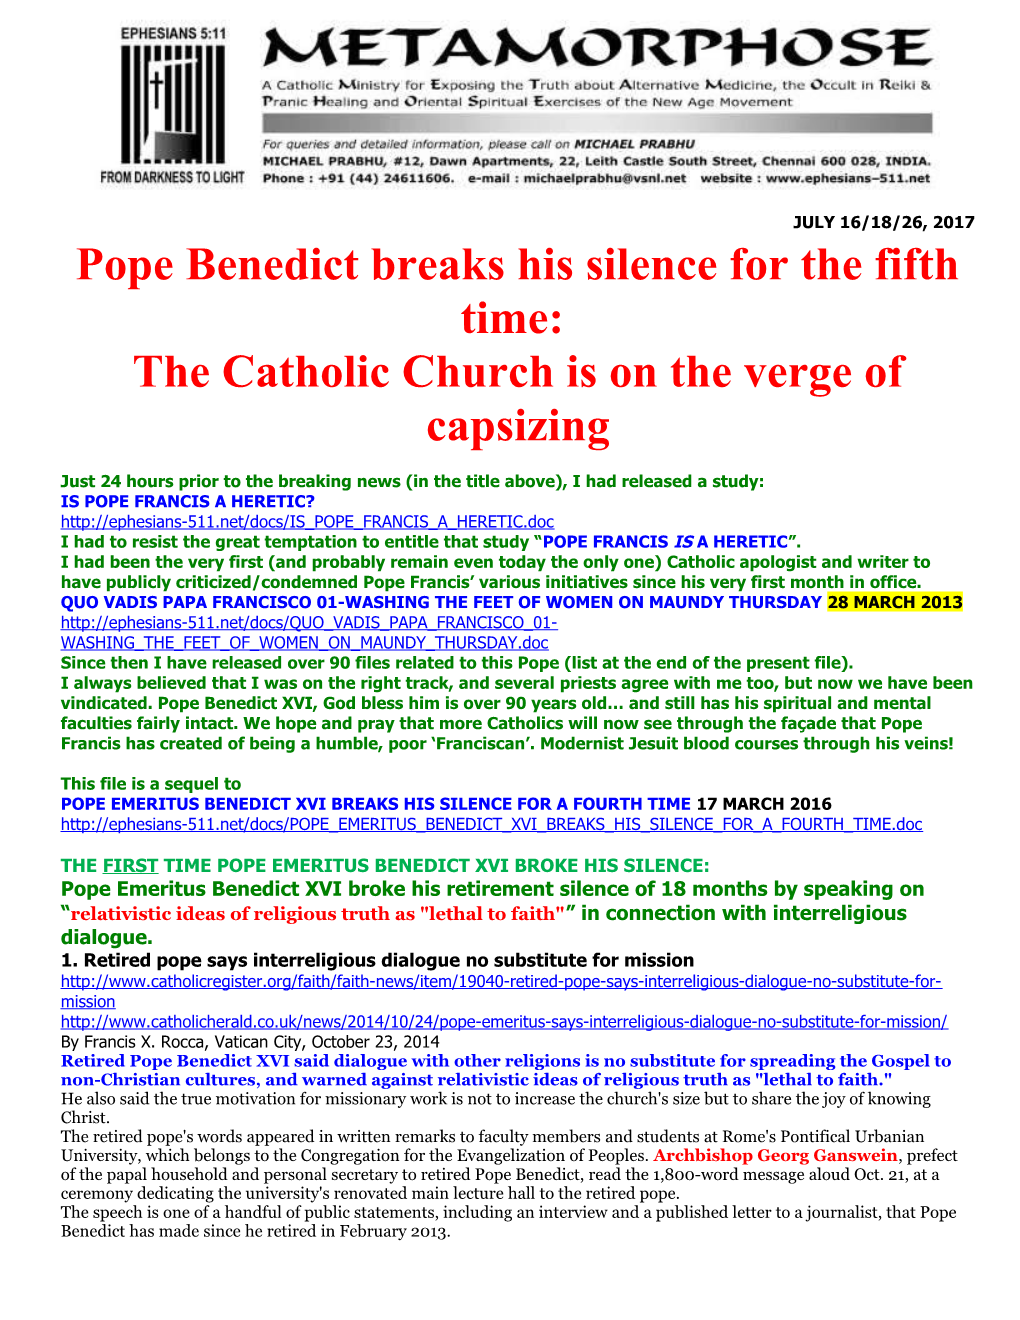 Pope Benedict Breaks His Silence for the Fifth Time